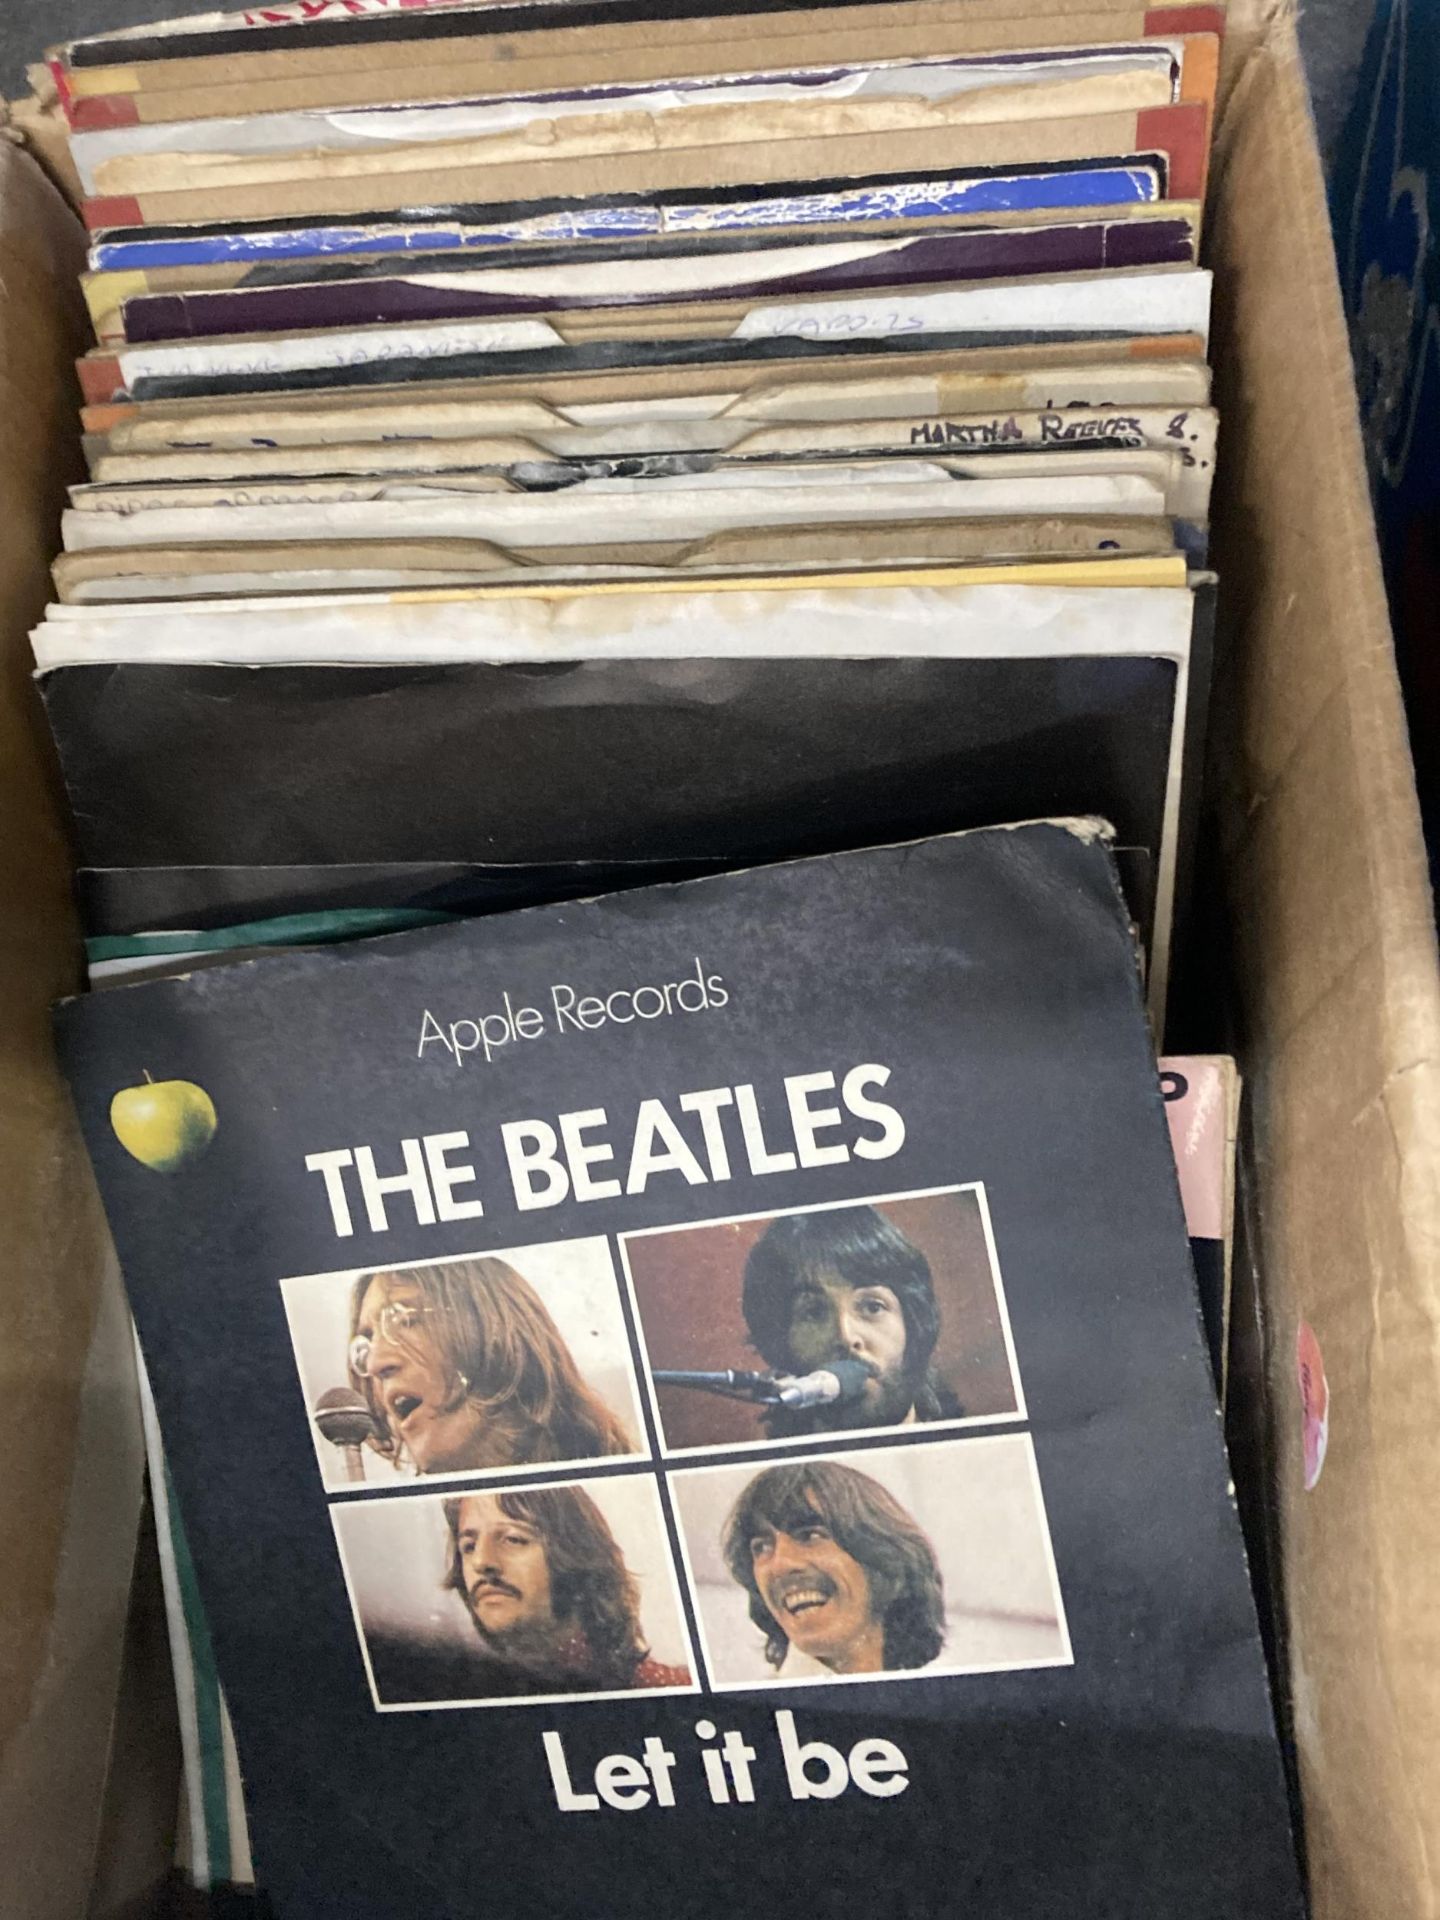 A COLLECTION OF VLET IT BE, ETCINYL RPM 45 SINGLE BEATLES RECORDS TO INCLUDE ALL MY LOVING,